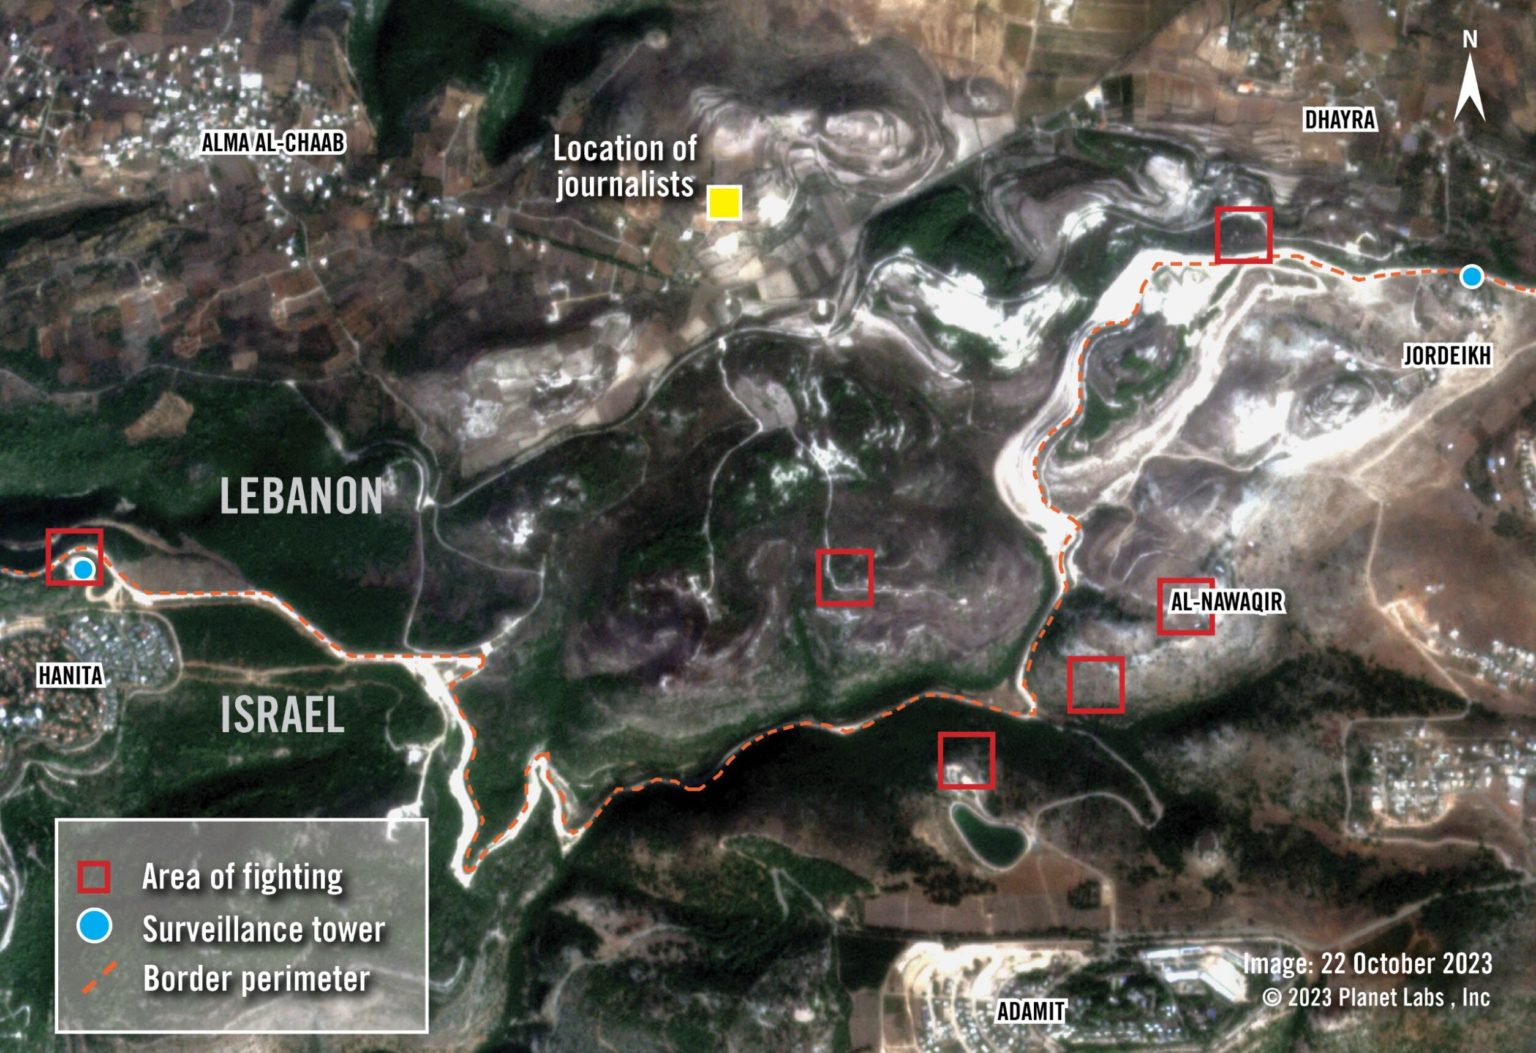 An overview image of the area shows the border perimeter, surveillance towers and areas of fighting recorded by the journalists before they were struck.